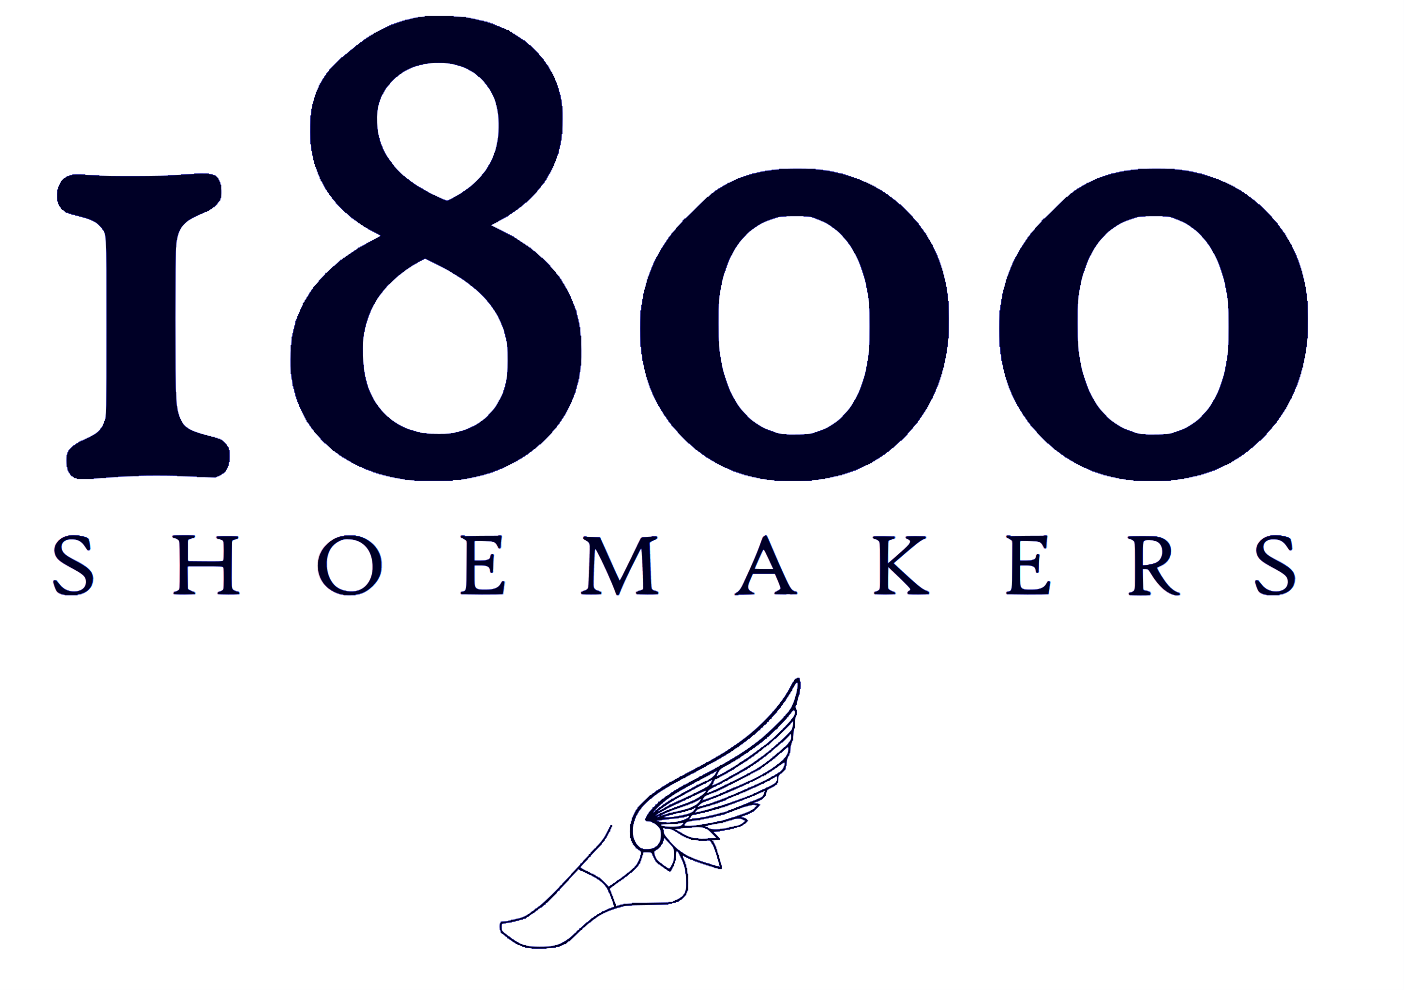 1800 Shoemakers